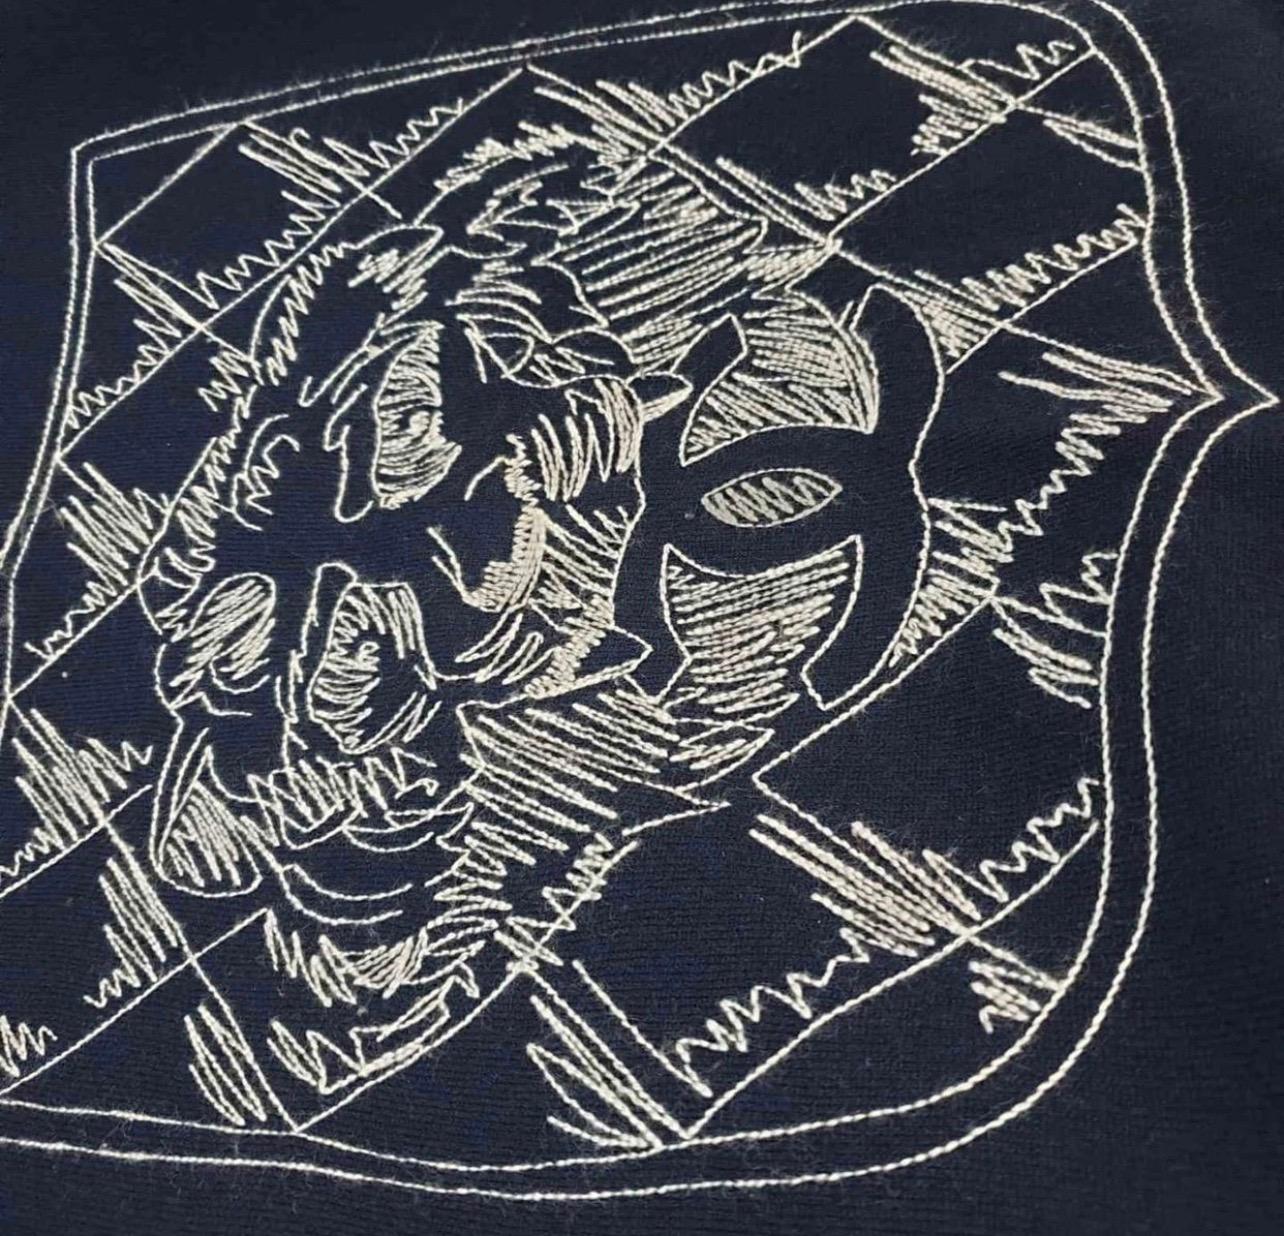 Chanel Logo Lion Cashmere Sweater In Excellent Condition For Sale In Krakow, PL